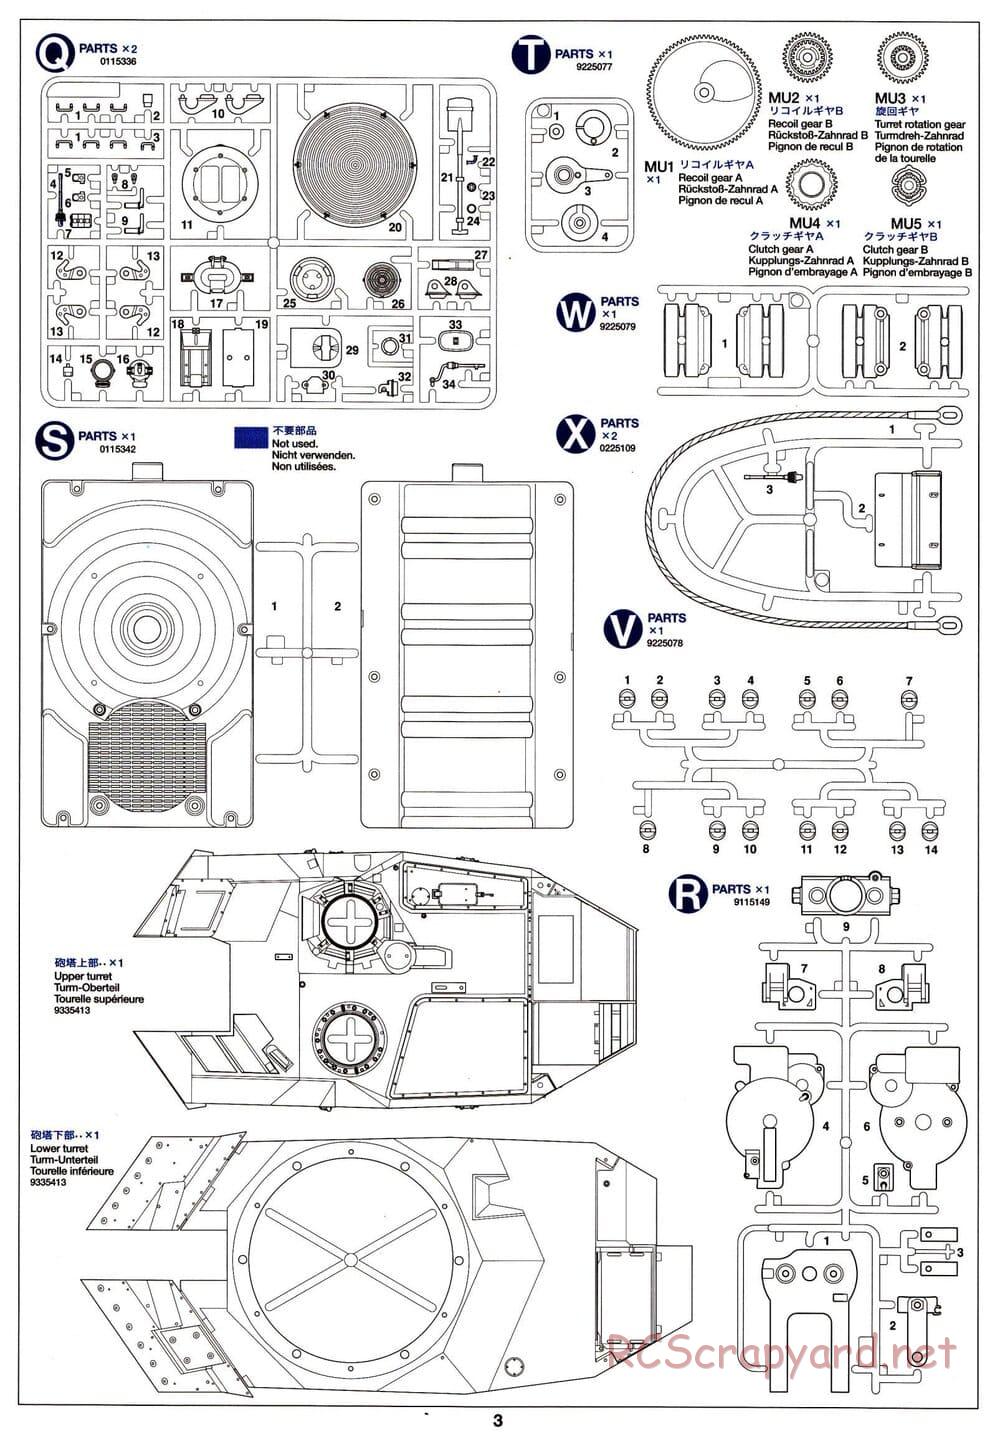 Tamiya - Leopard 2 A6 - 1/16 Scale Chassis - Parts 3